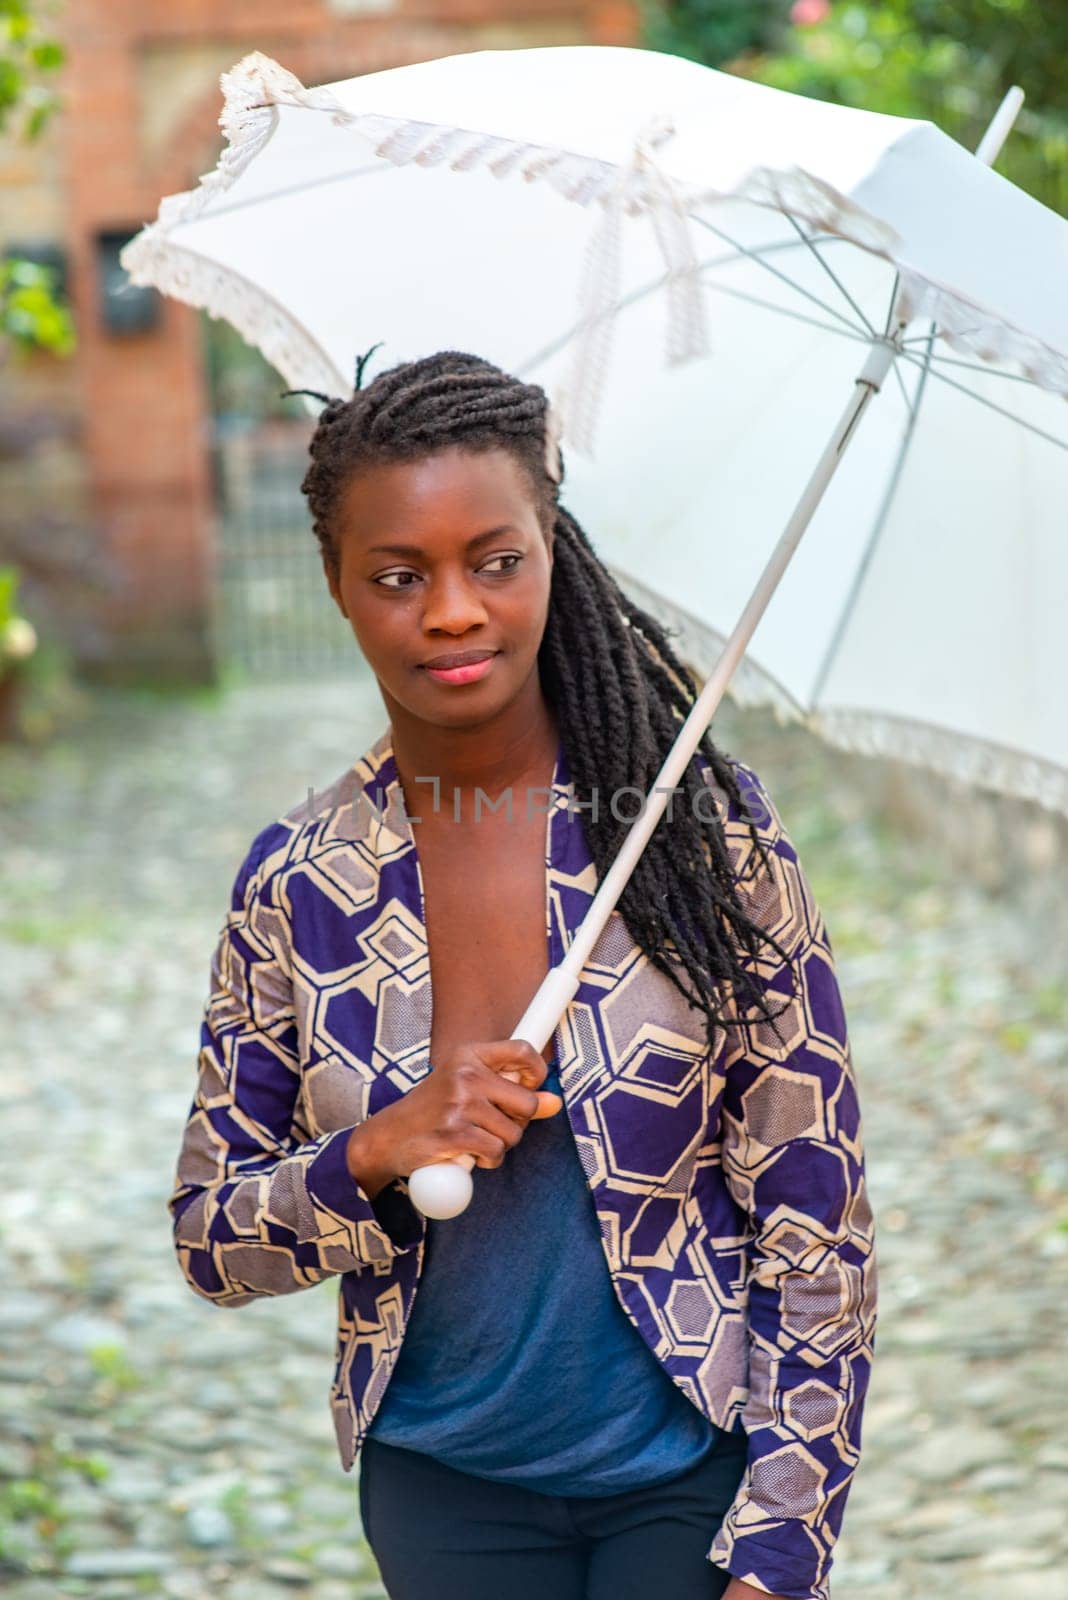 Young woman with dreadlocks braided hairstyle holding umbrella parasol. Happy young woman feeling confident in her style. Fashionable woman standing in the street of old village against stone wall.